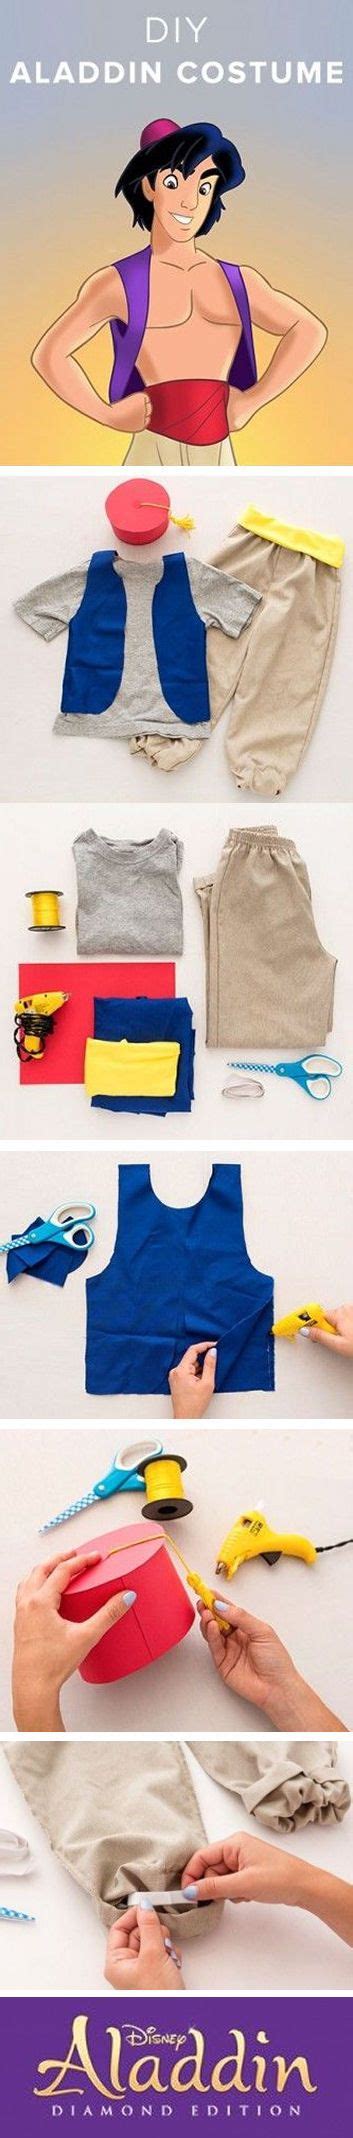 This aladdin costume diy is inspired by the vest from the 2019 movie! #DIY Easy To Do Aladdin Halloween Kids Costume ︎ #halloween #aladdin #disney | Aladdin halloween ...